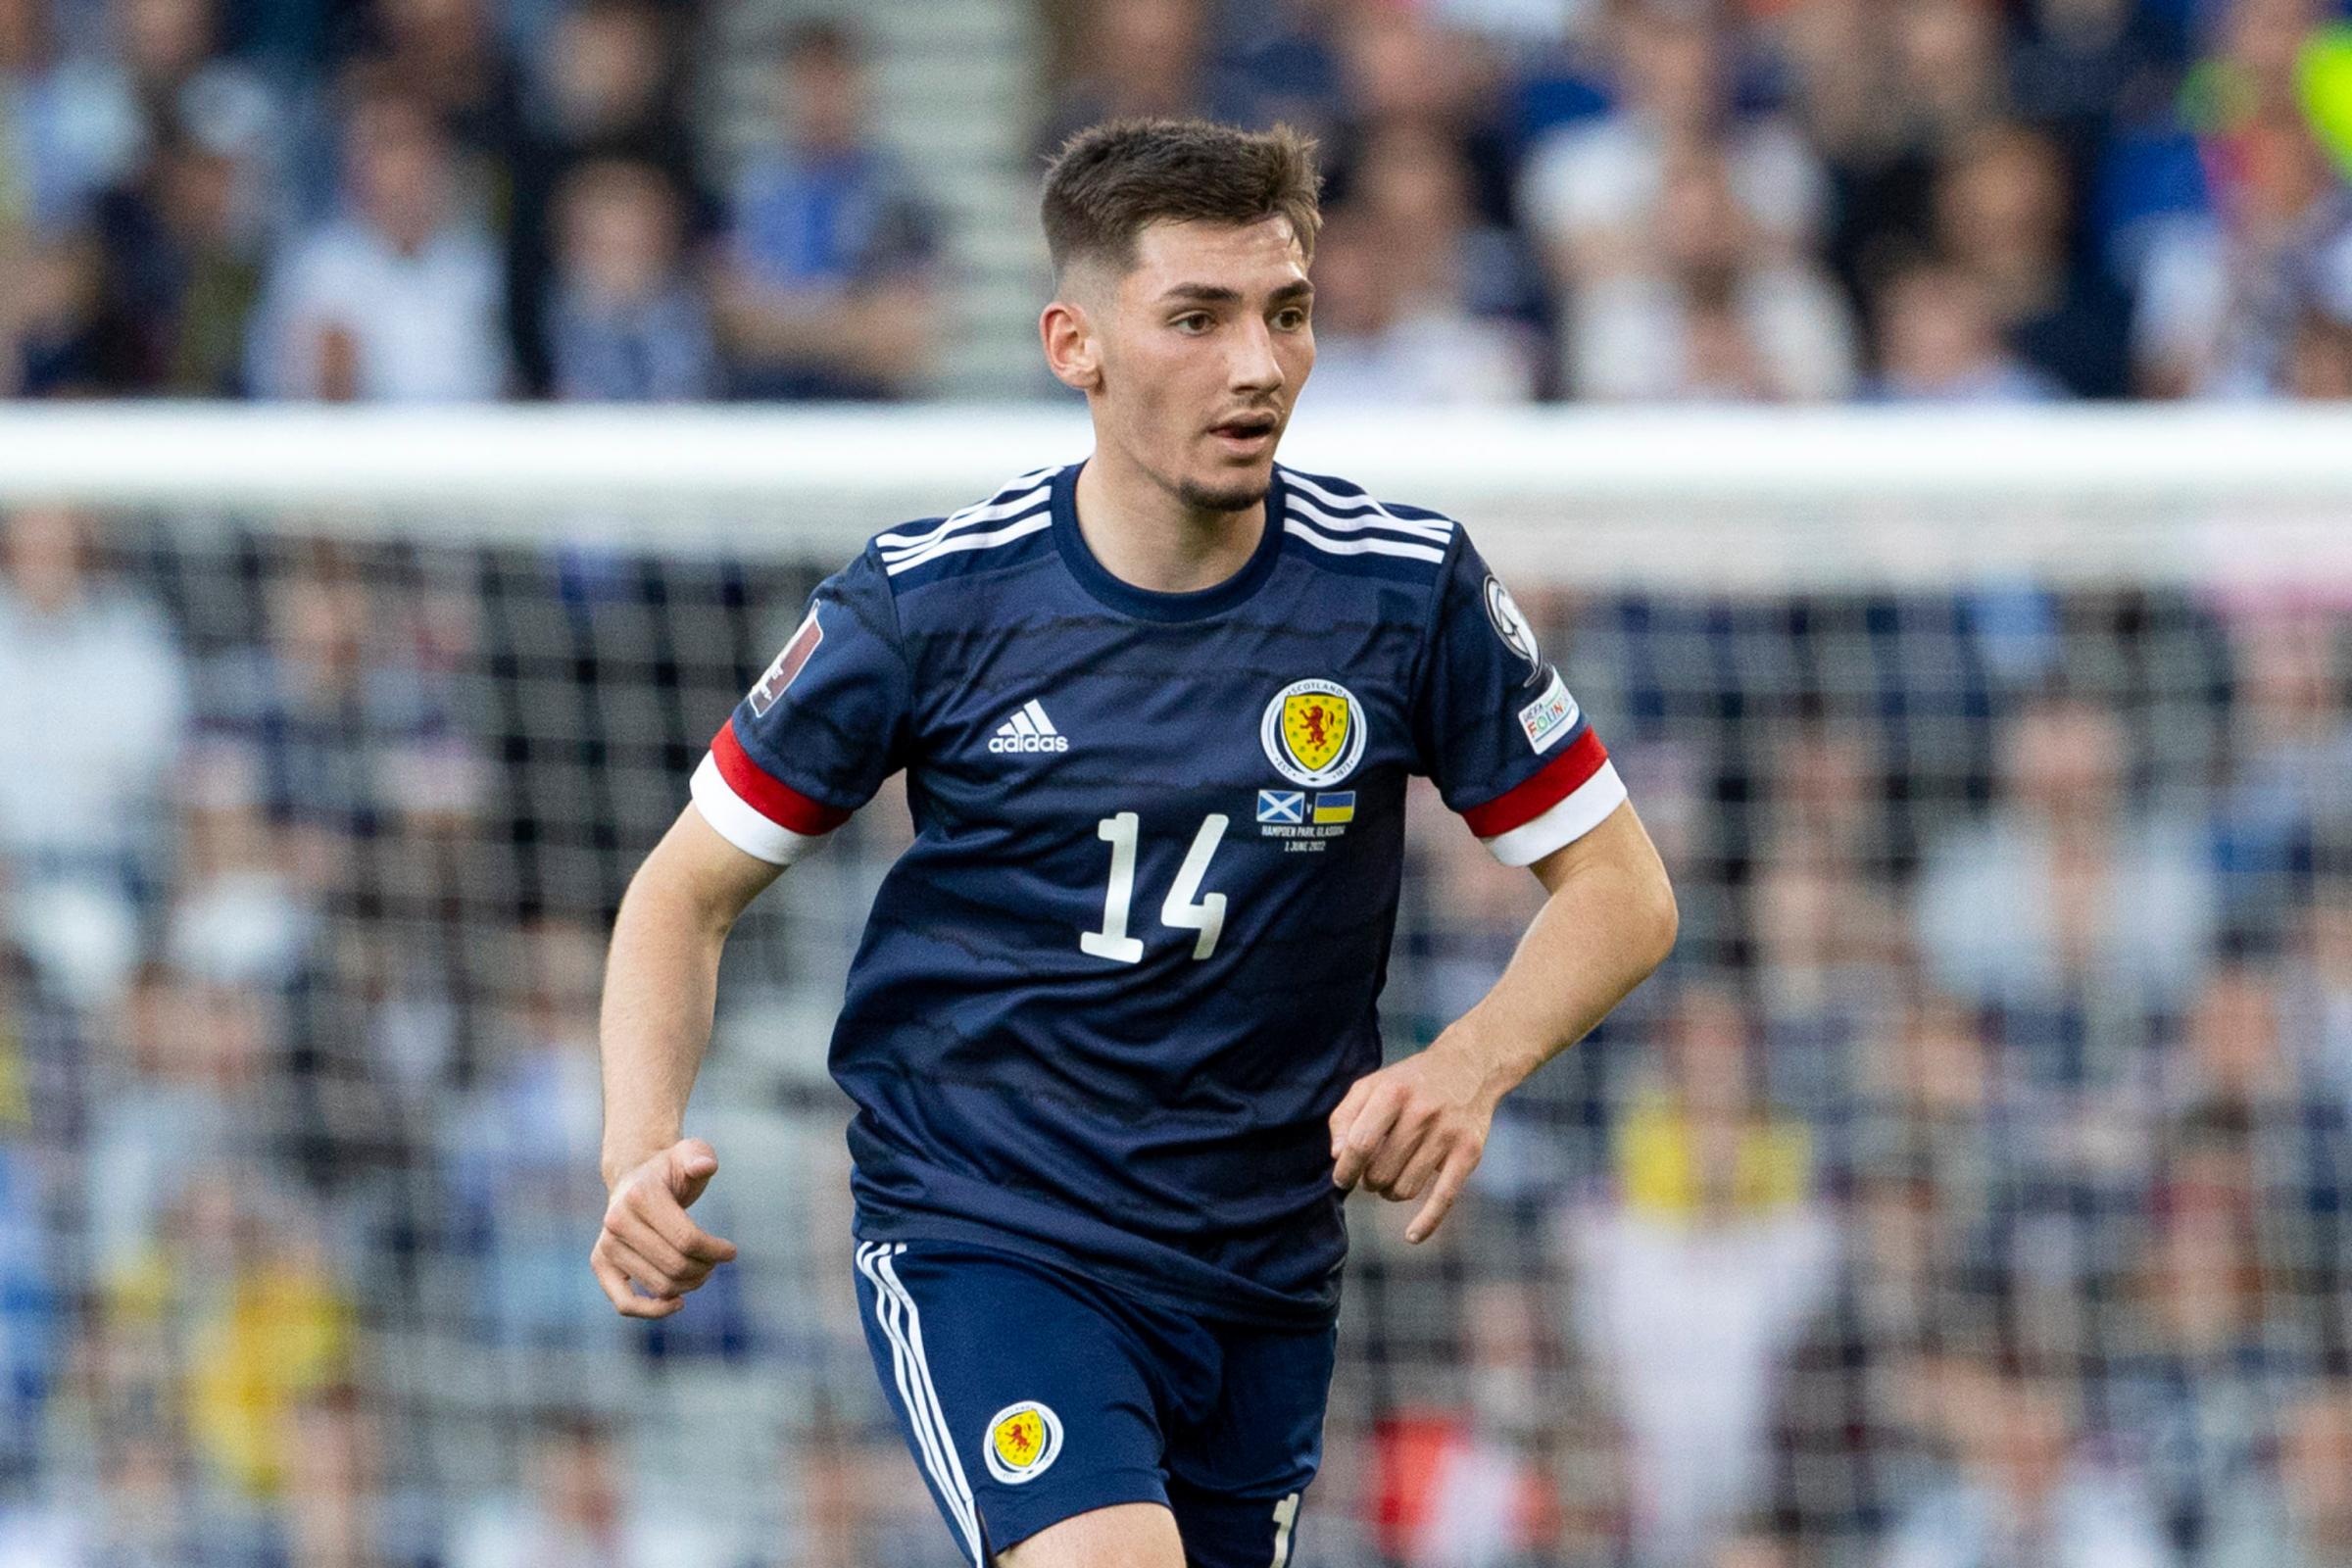 Kenny Dalglish defends Billy Gilmour after Charlie Nicholas' Barry Bannan comments